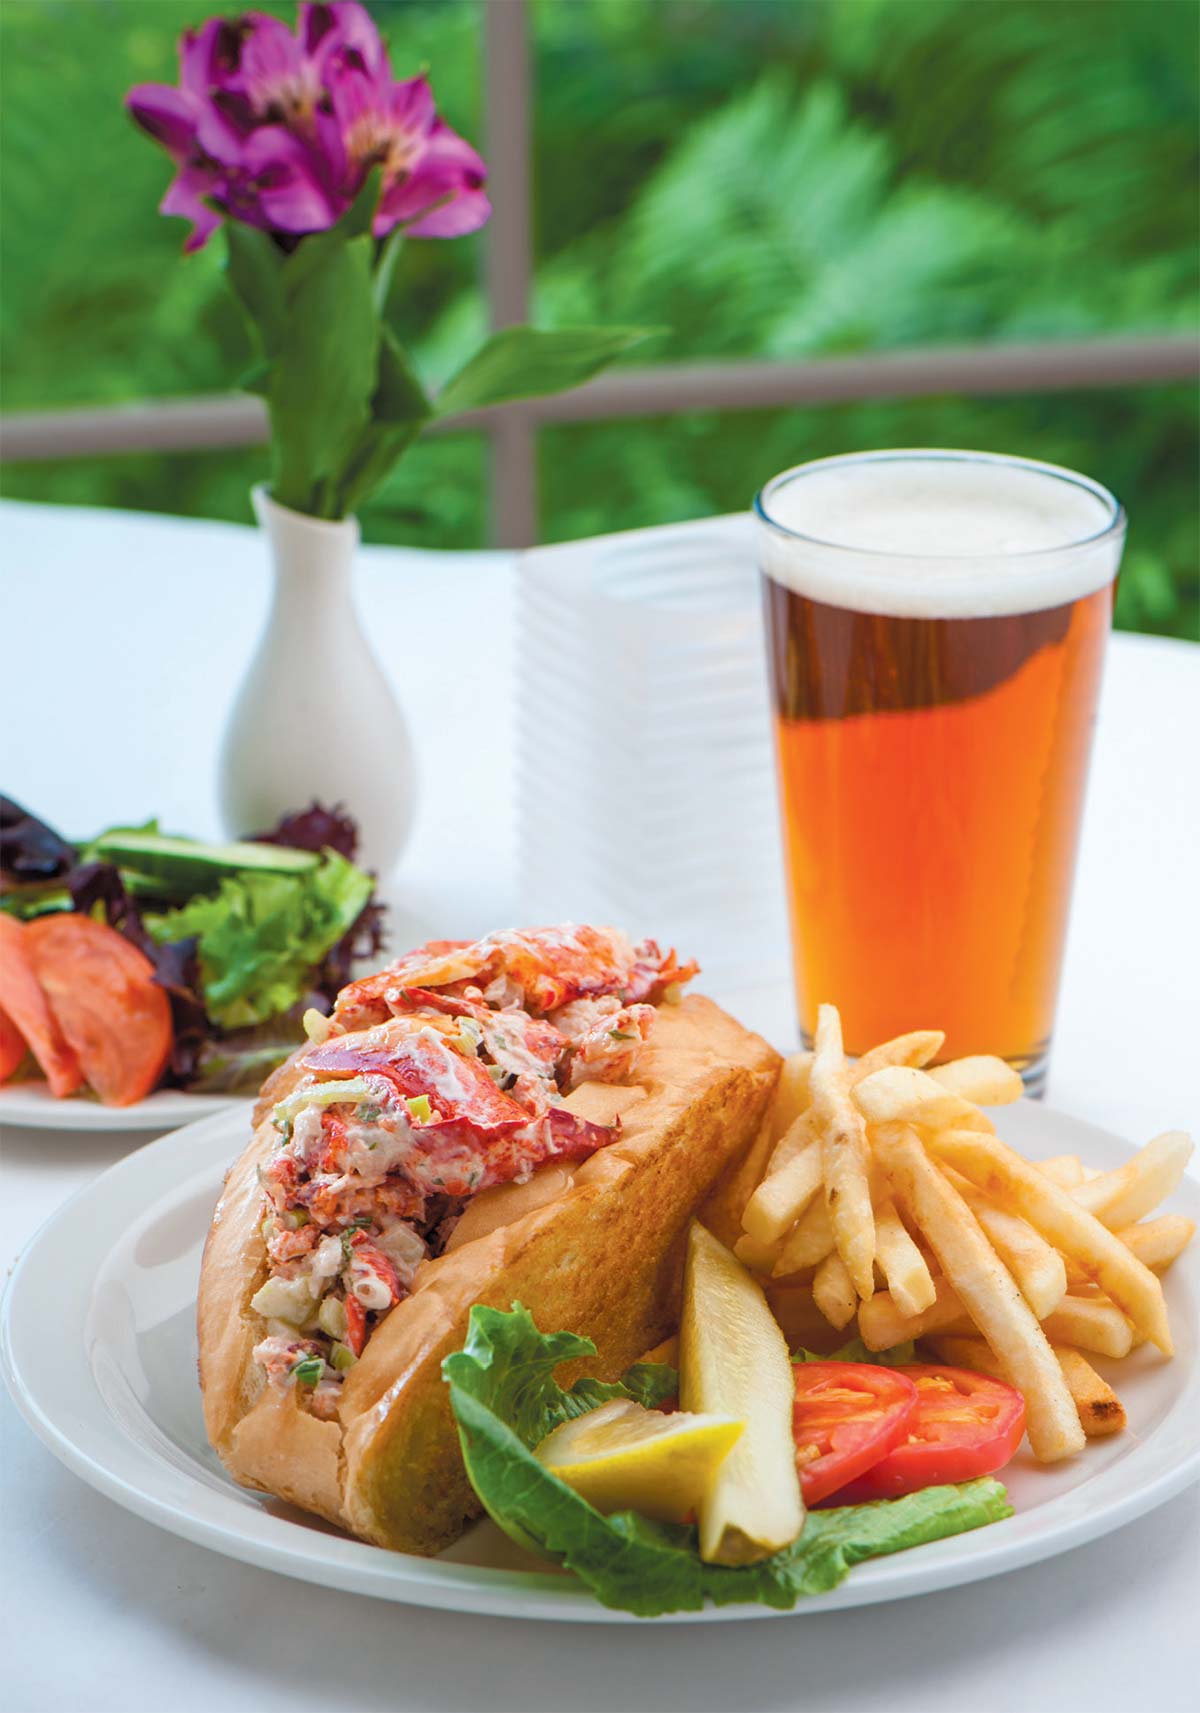 Whether it’s the New England Lobster Boil or the Lobster Roll (shown here), lobster helps to give Harbor Fish Market & Grille its New England flavor. Contributed photo